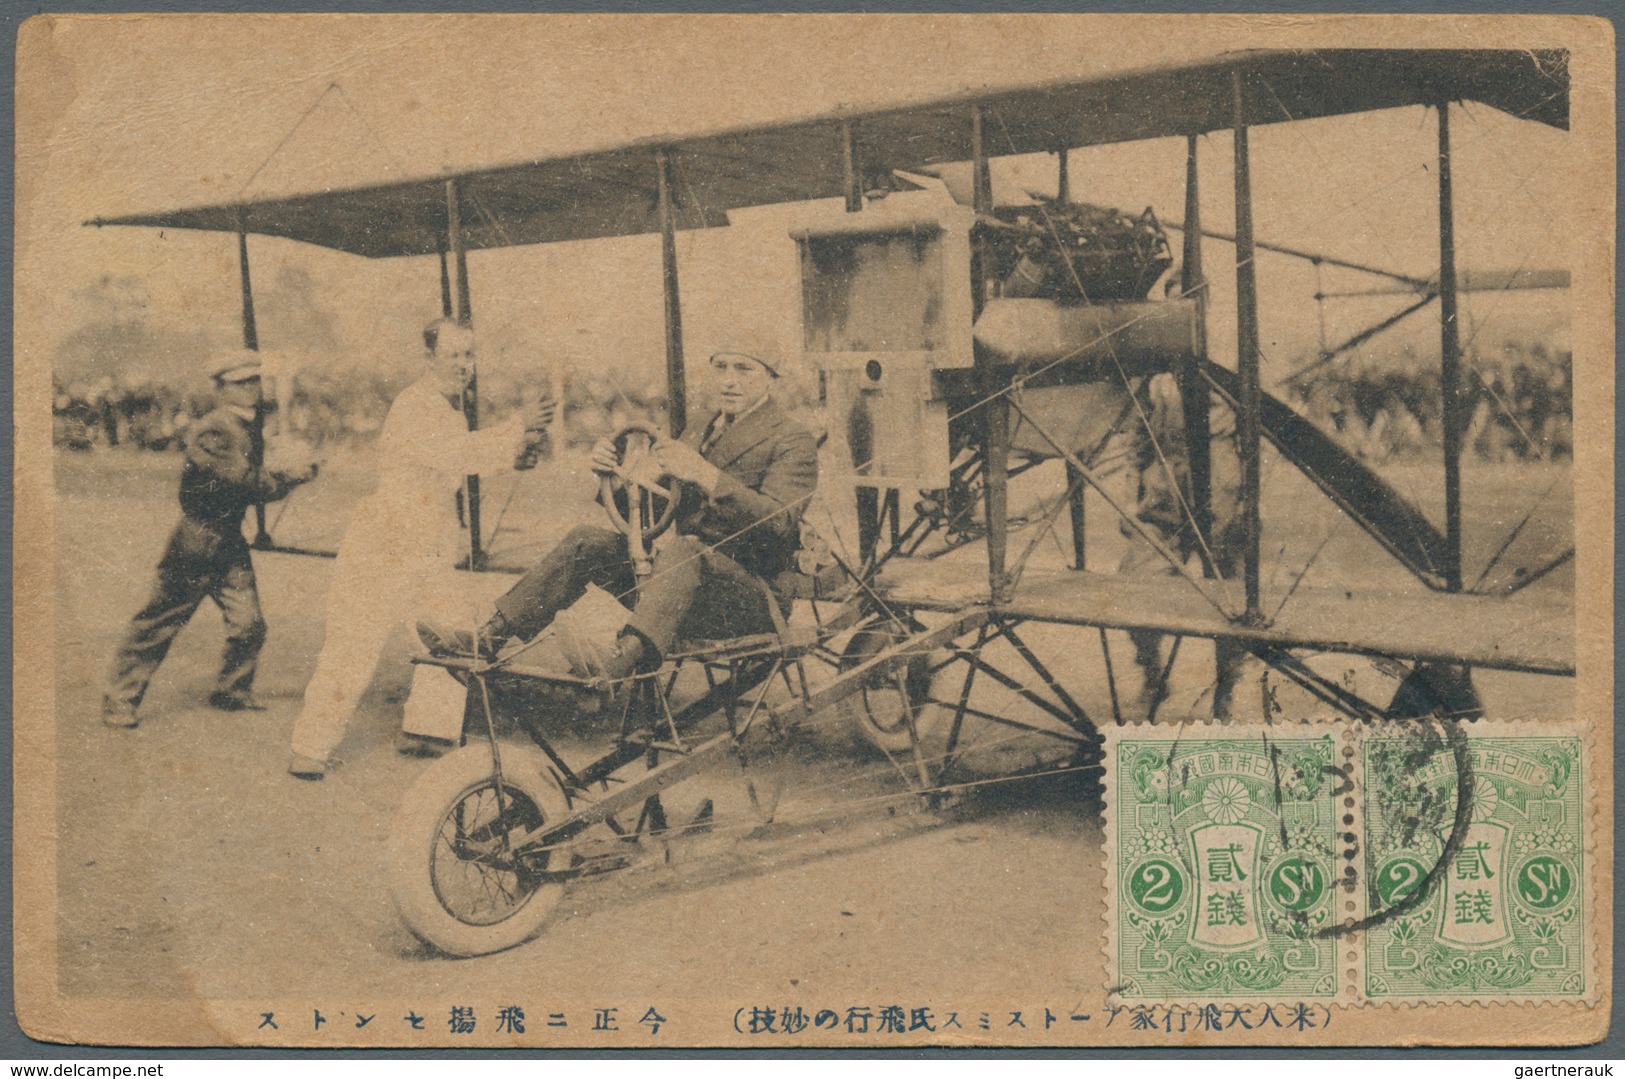 Flugpost Übersee: 1914/18, the japanese pioneer aviator and WWI-pilot in France, Baron SHIGENO Kiyot